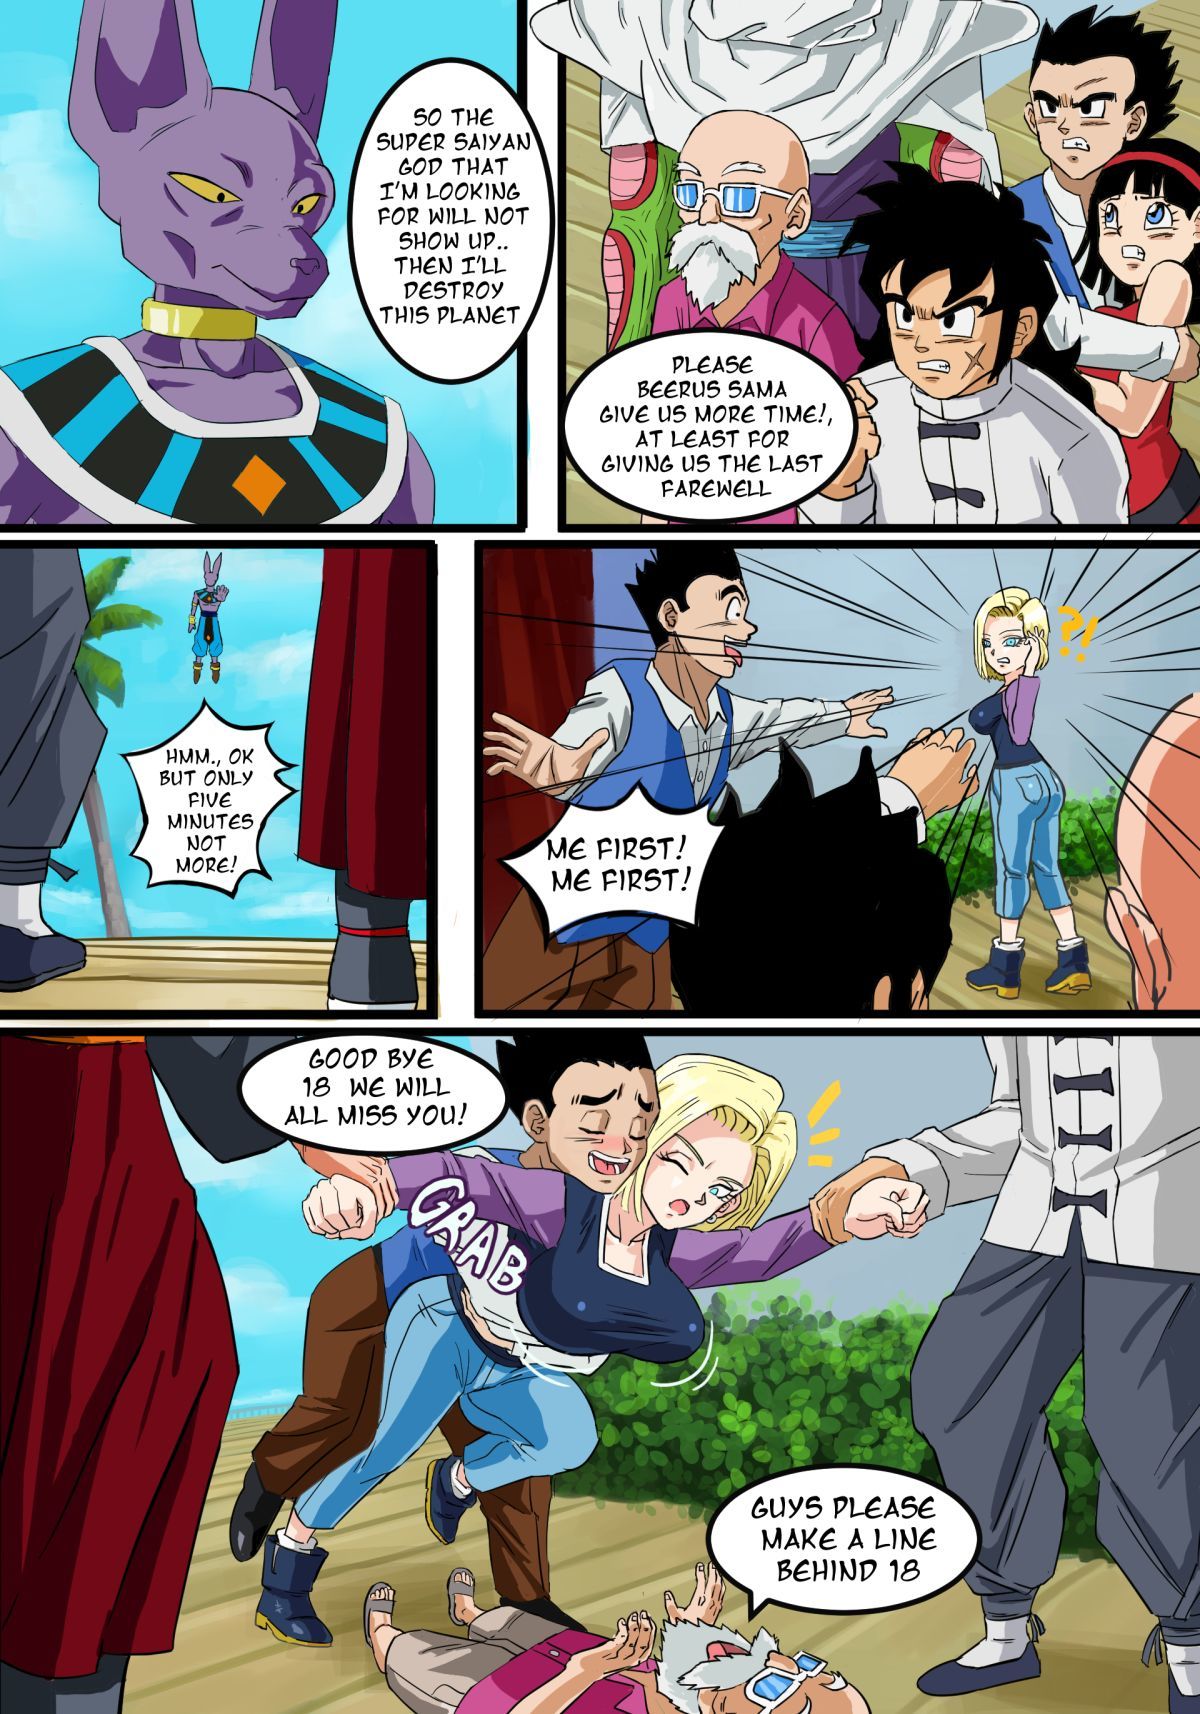 Dragon Ball Z Android 18 Porn Caption - Beerus Caption Dragon Ball Super by Pink Pawg | Porn Comics